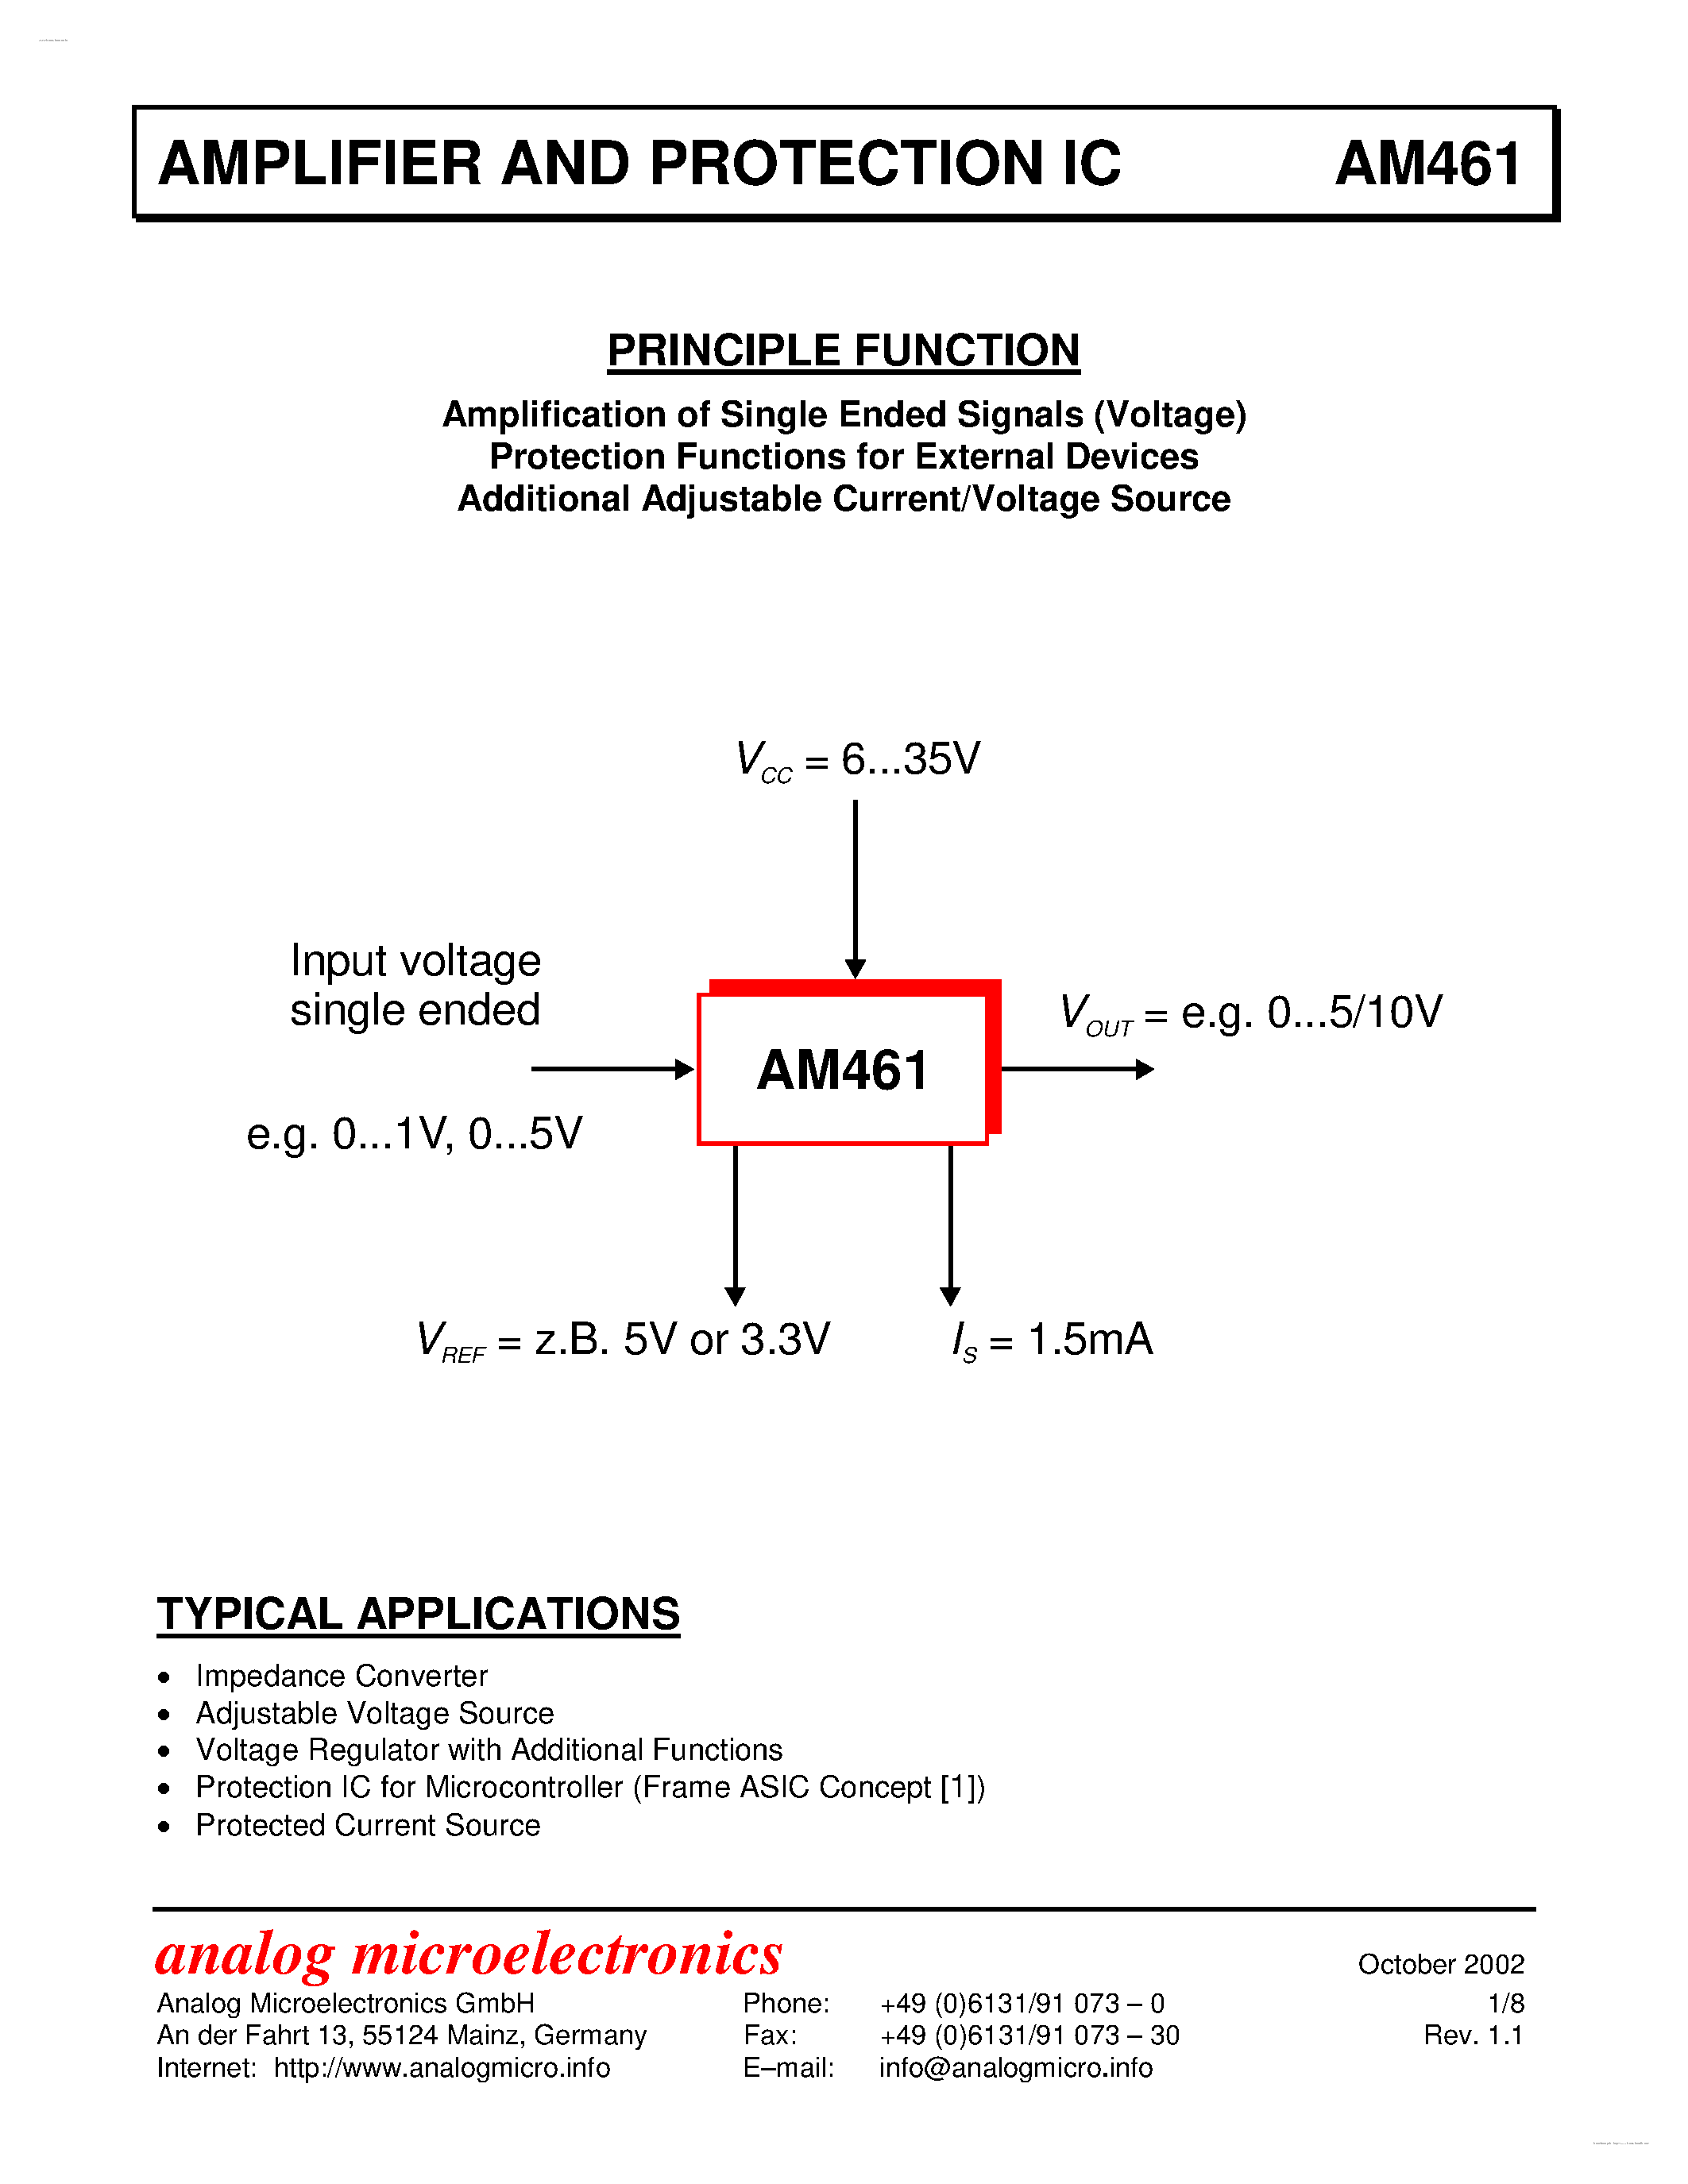 Datasheet AM461 - AMPLIFIER AND PROTECTION IC page 1